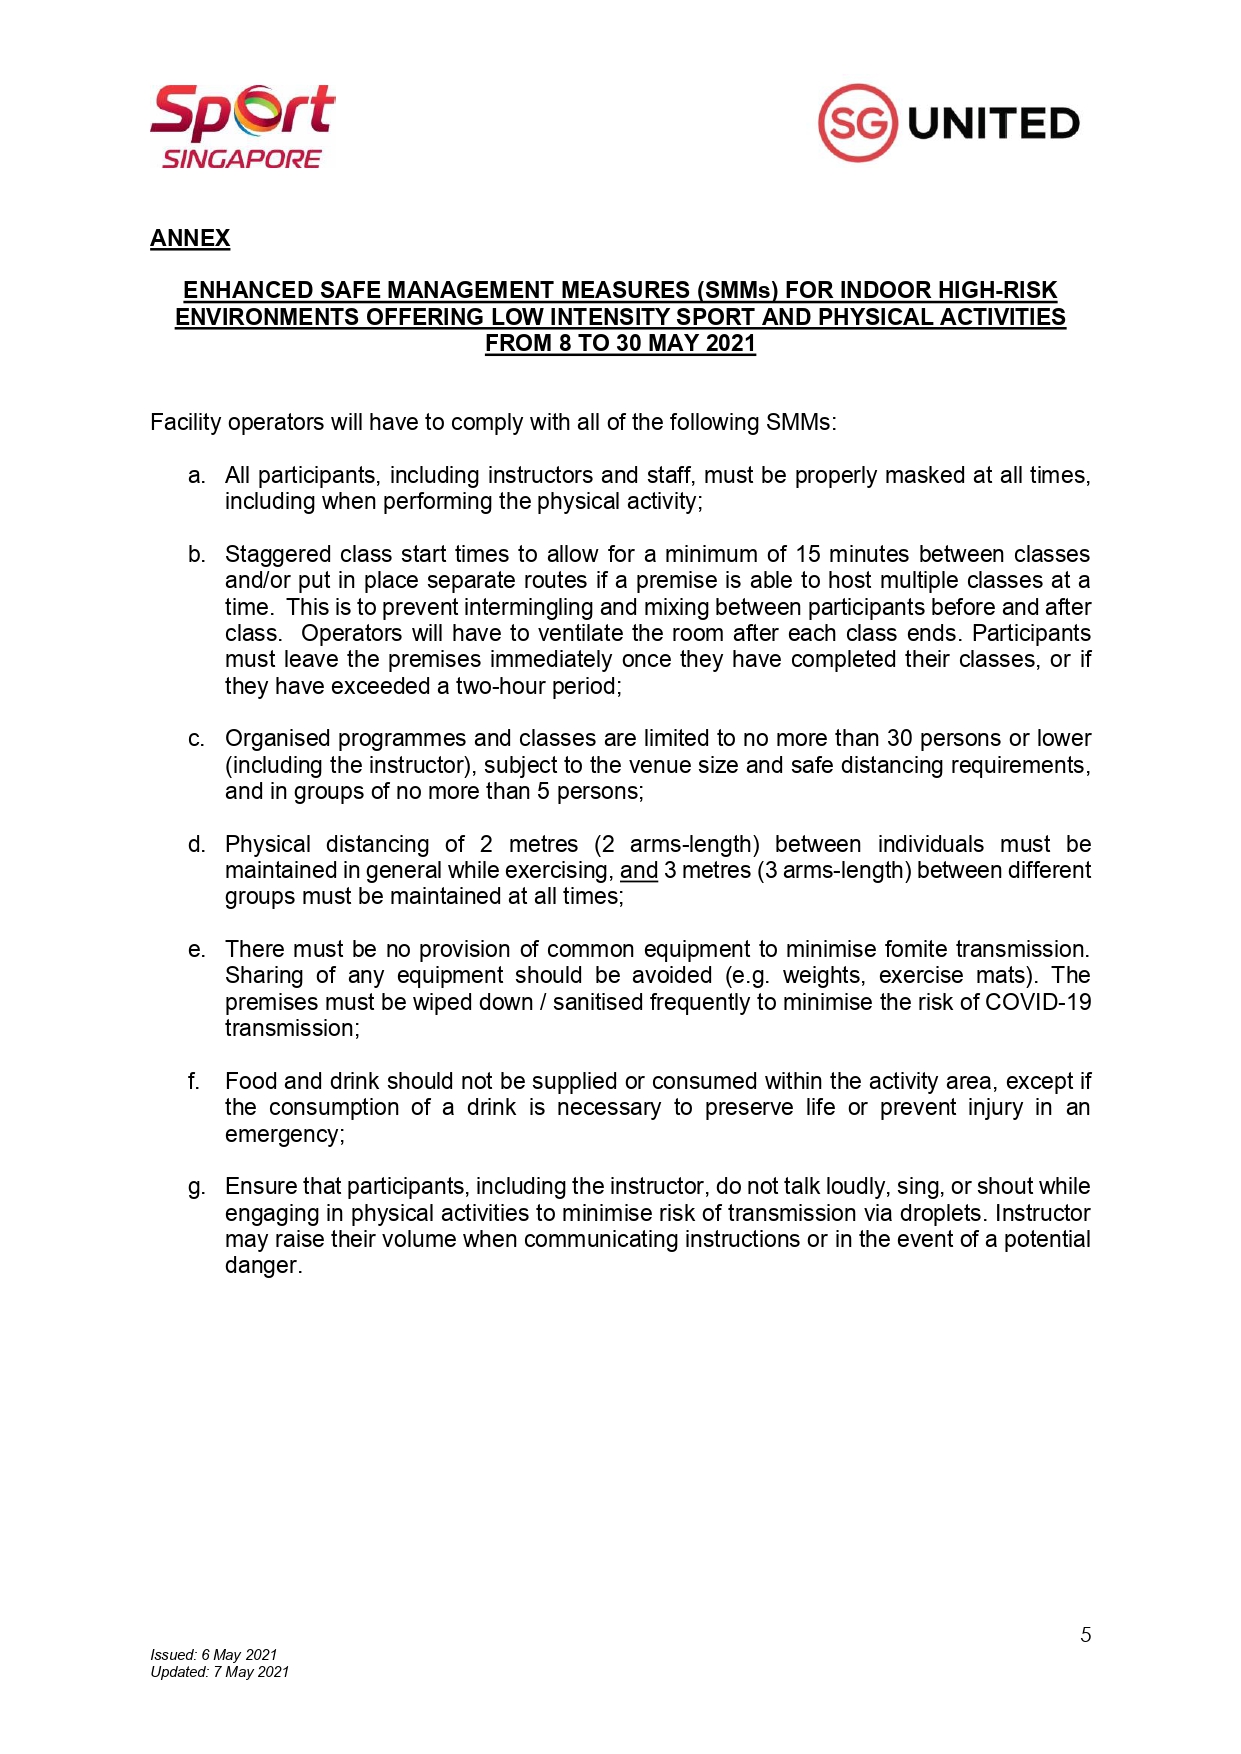 (Updated As Of 7 May 2021) Stricter Safe Management Measures For Sport And Physical Exercise and Activity (8 to 30 May)_pages-to-jpg-0005